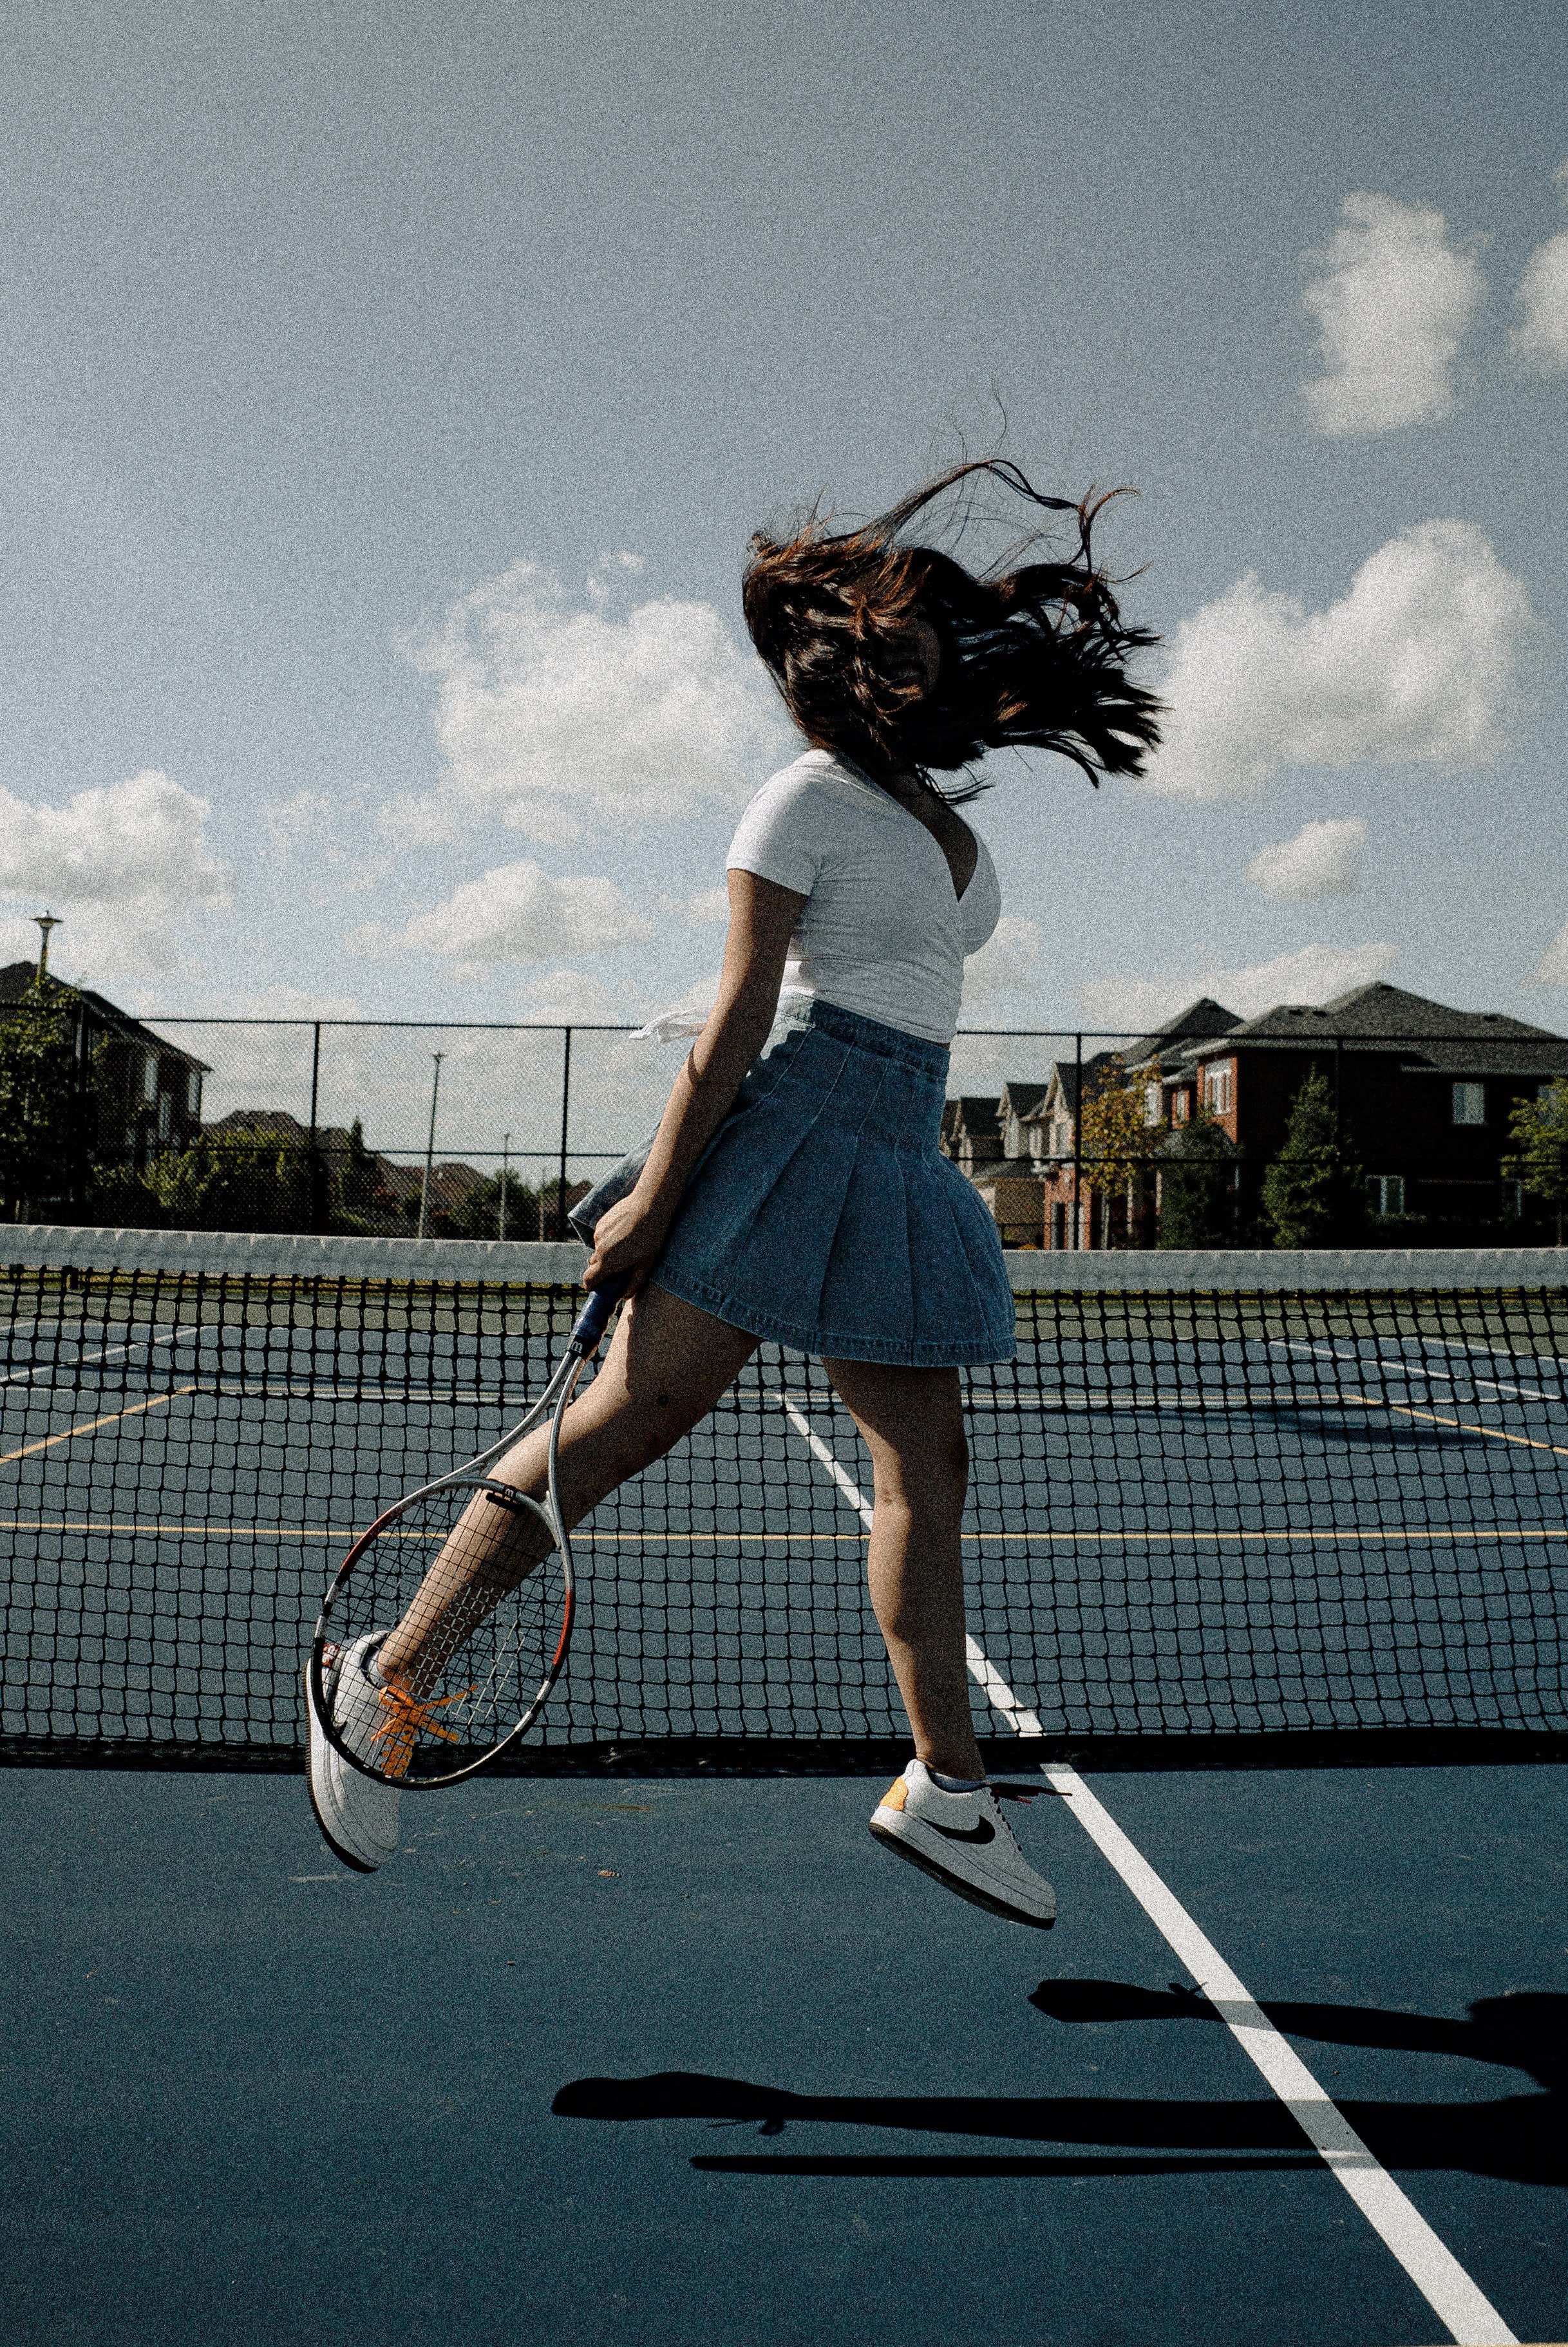 A girl in a tennis court. | Source: Pexels/Wendy Wei